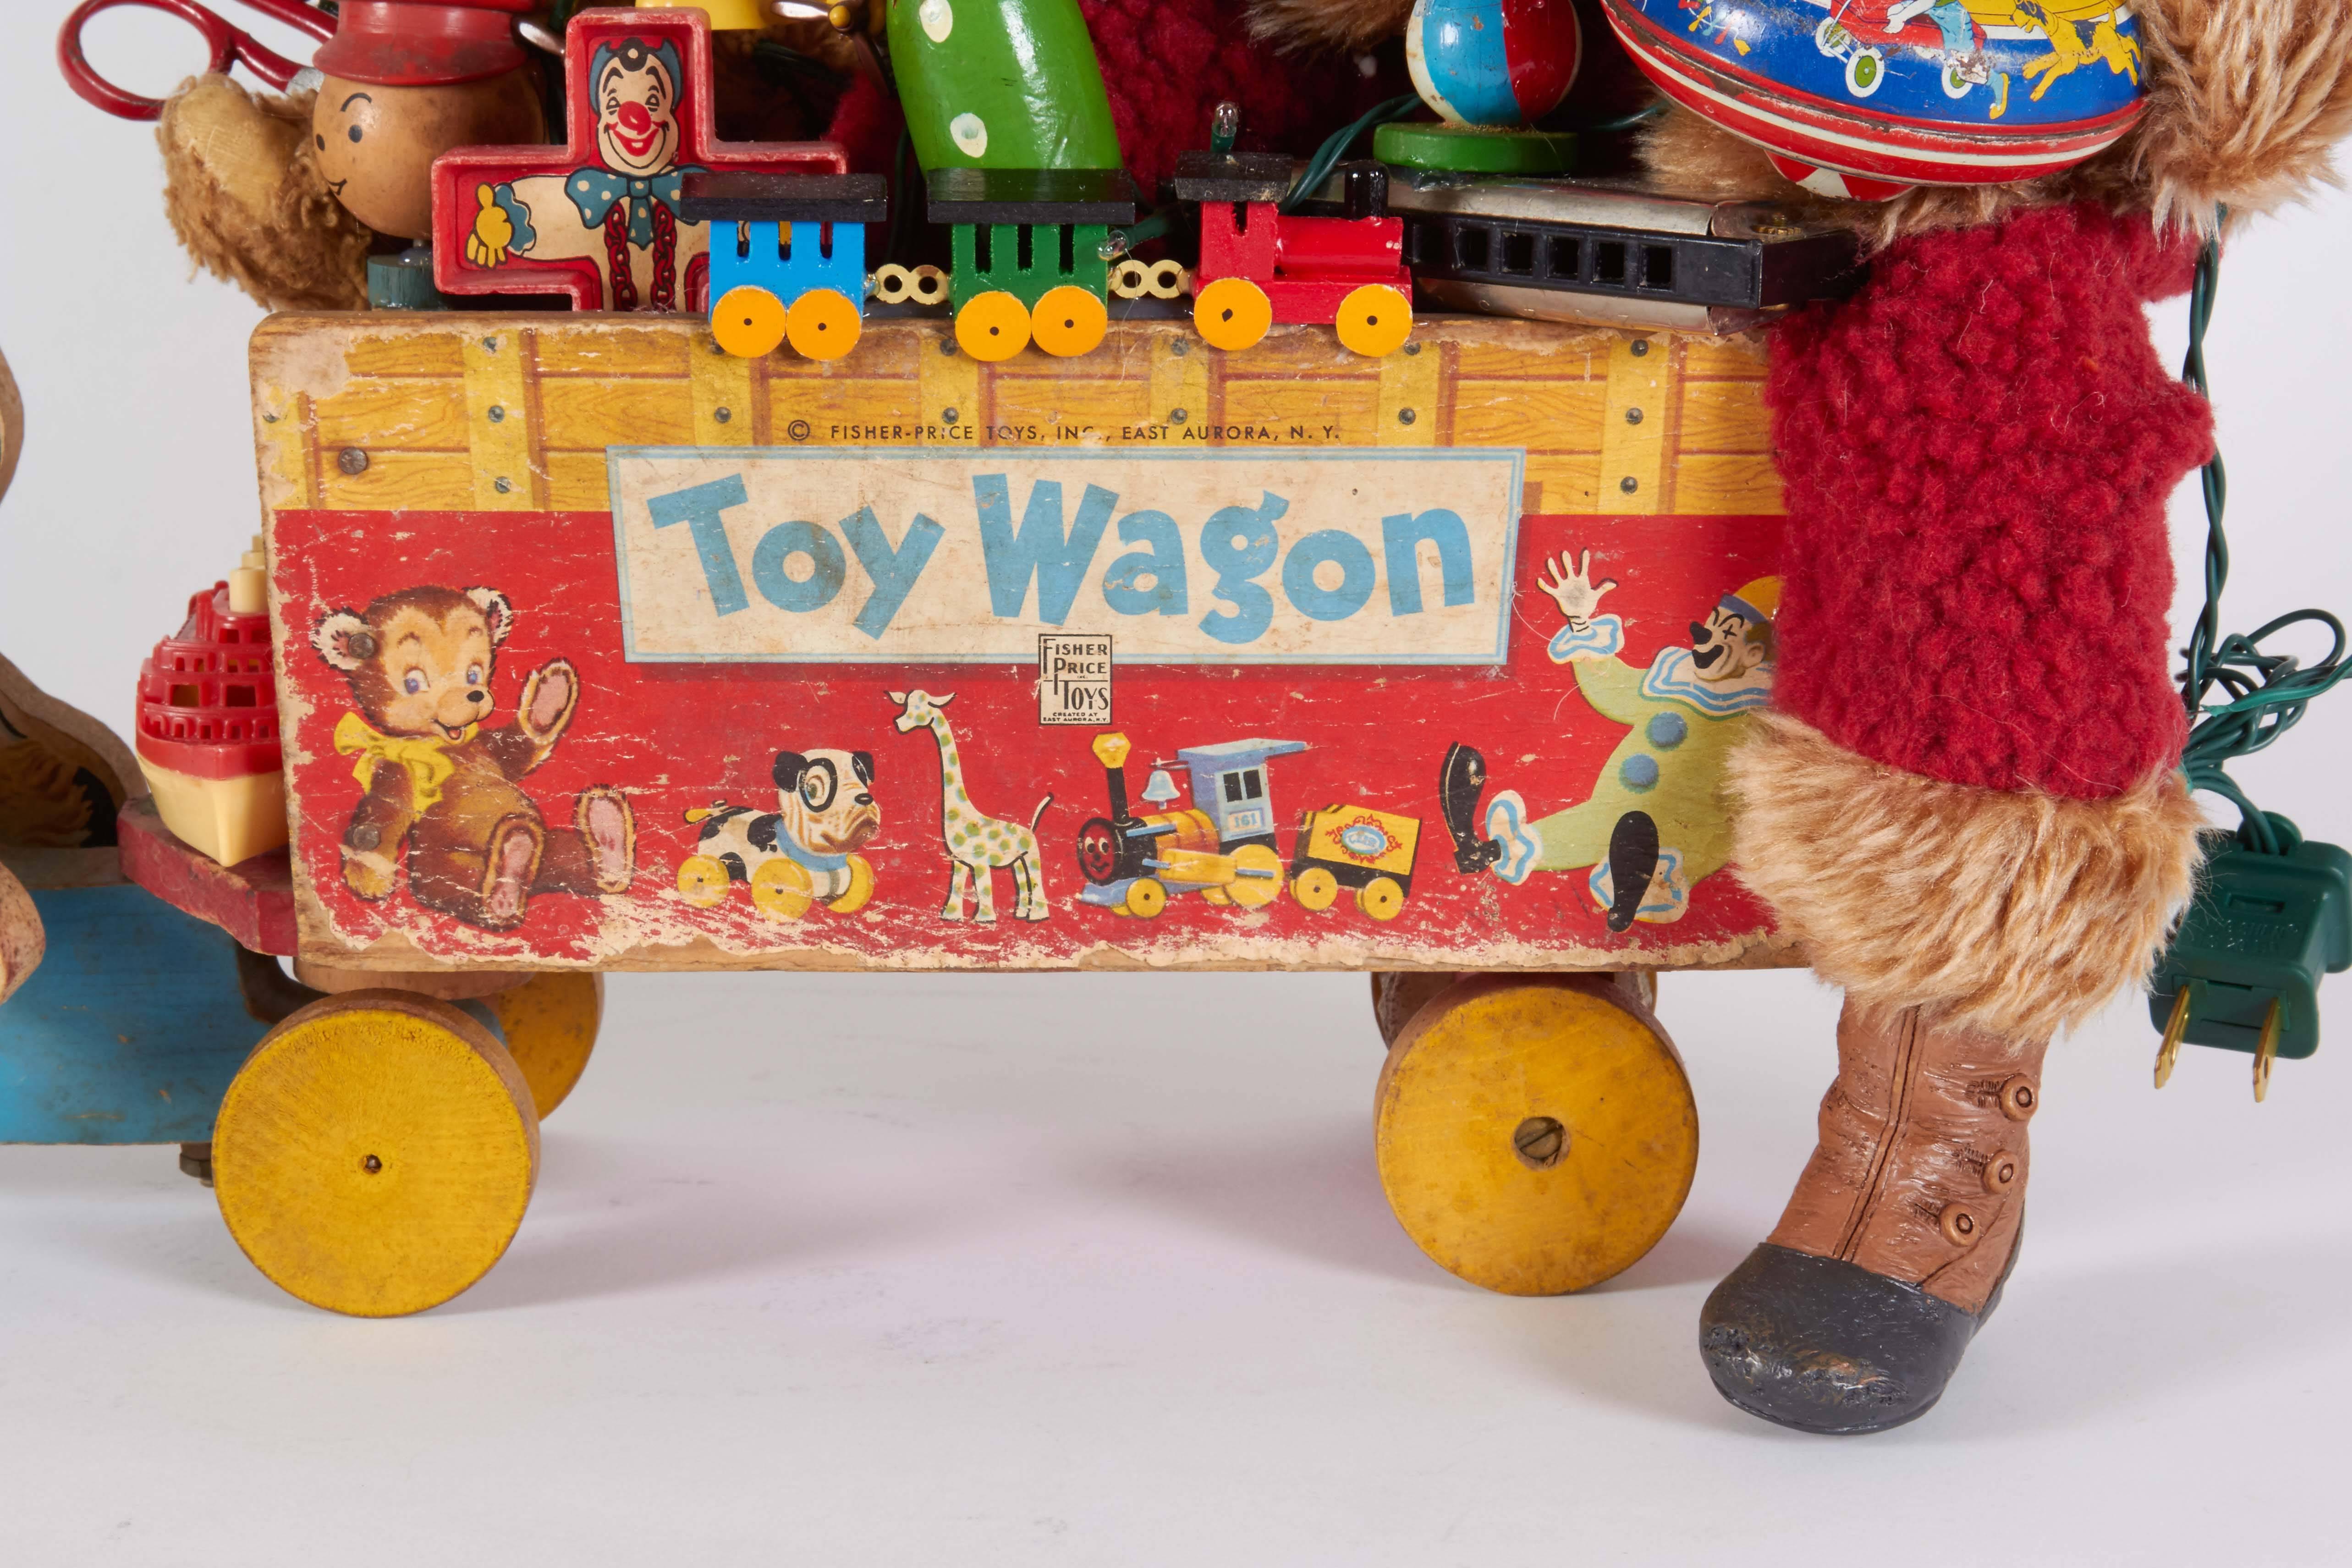 Santa on Toy Wagon collectible by Karen Didion brings a one-of-a-kind vintage look to your Christmas decor. 

Karen incorporates a unique selection of vintage antique toys, ornaments and accessories into each piece as well as her own beautiful